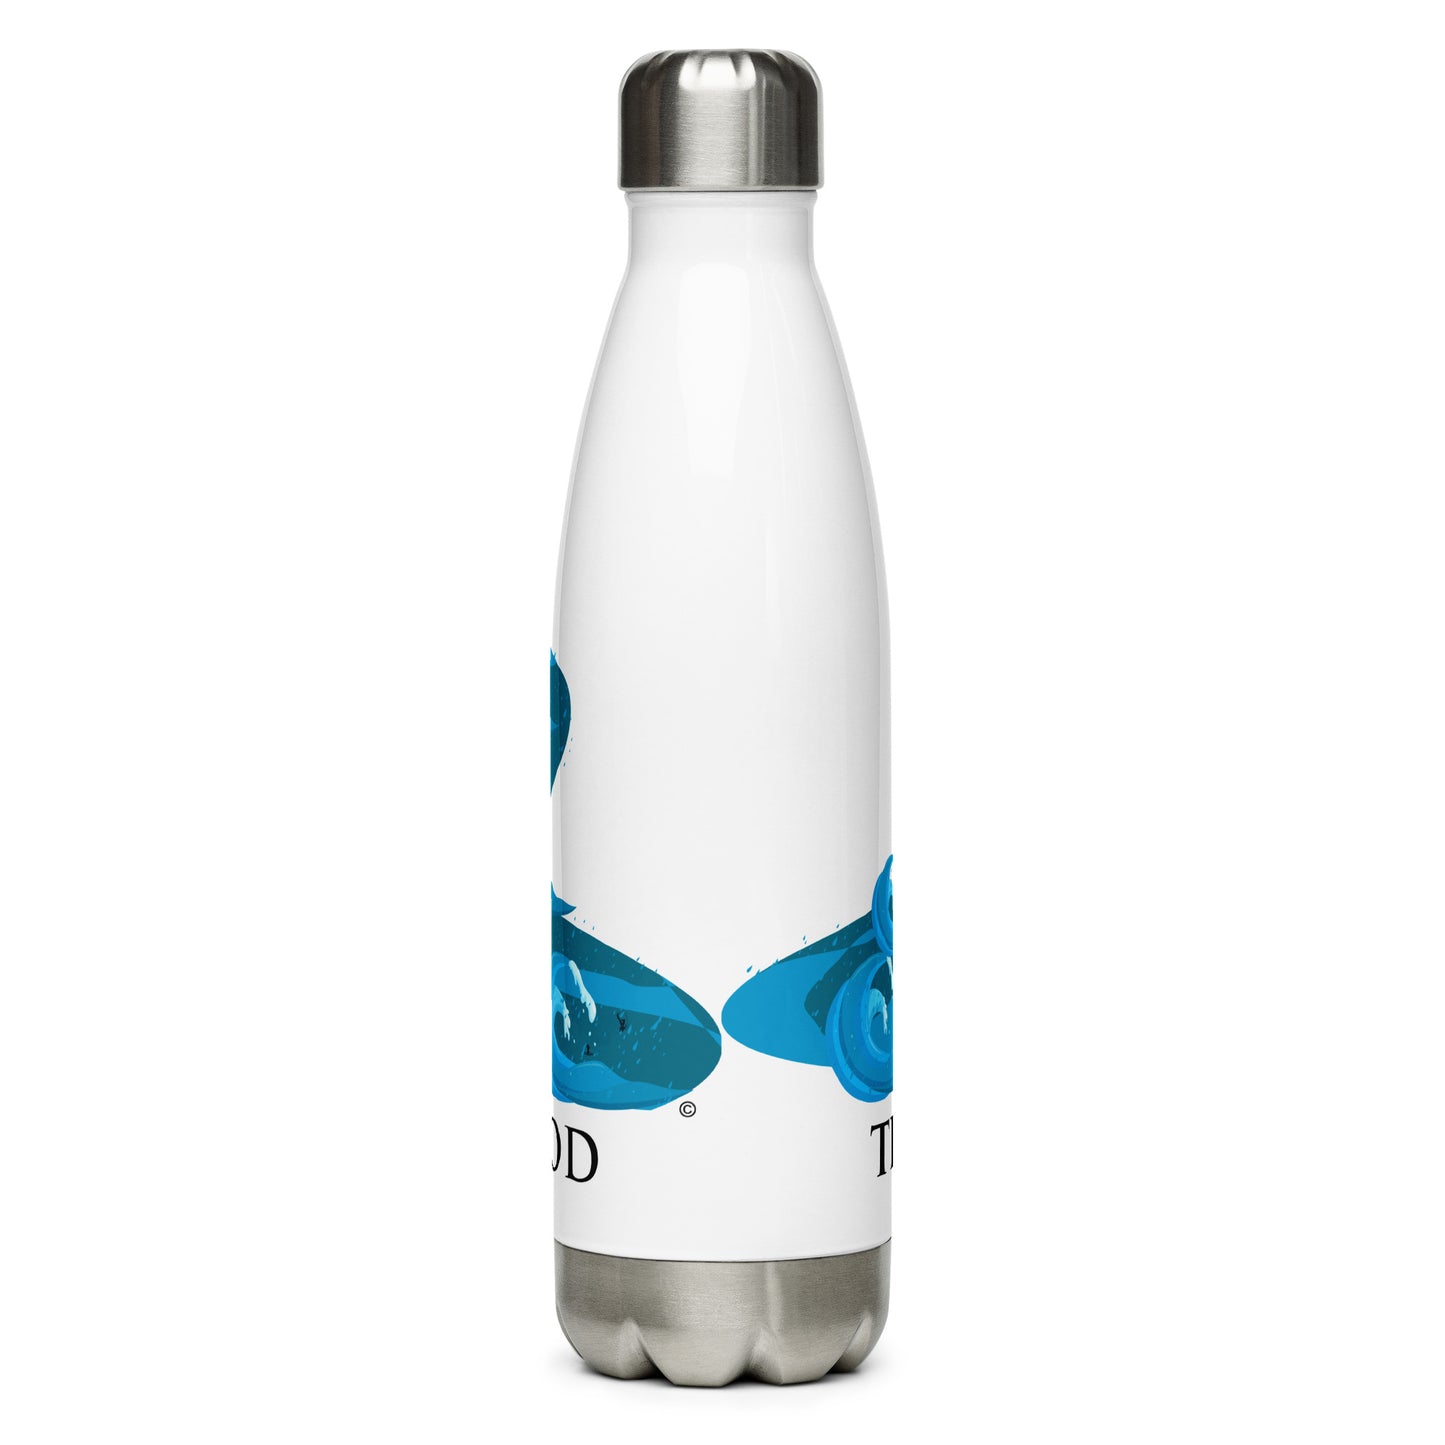 The Great Flood Stainless Steel Water Bottle